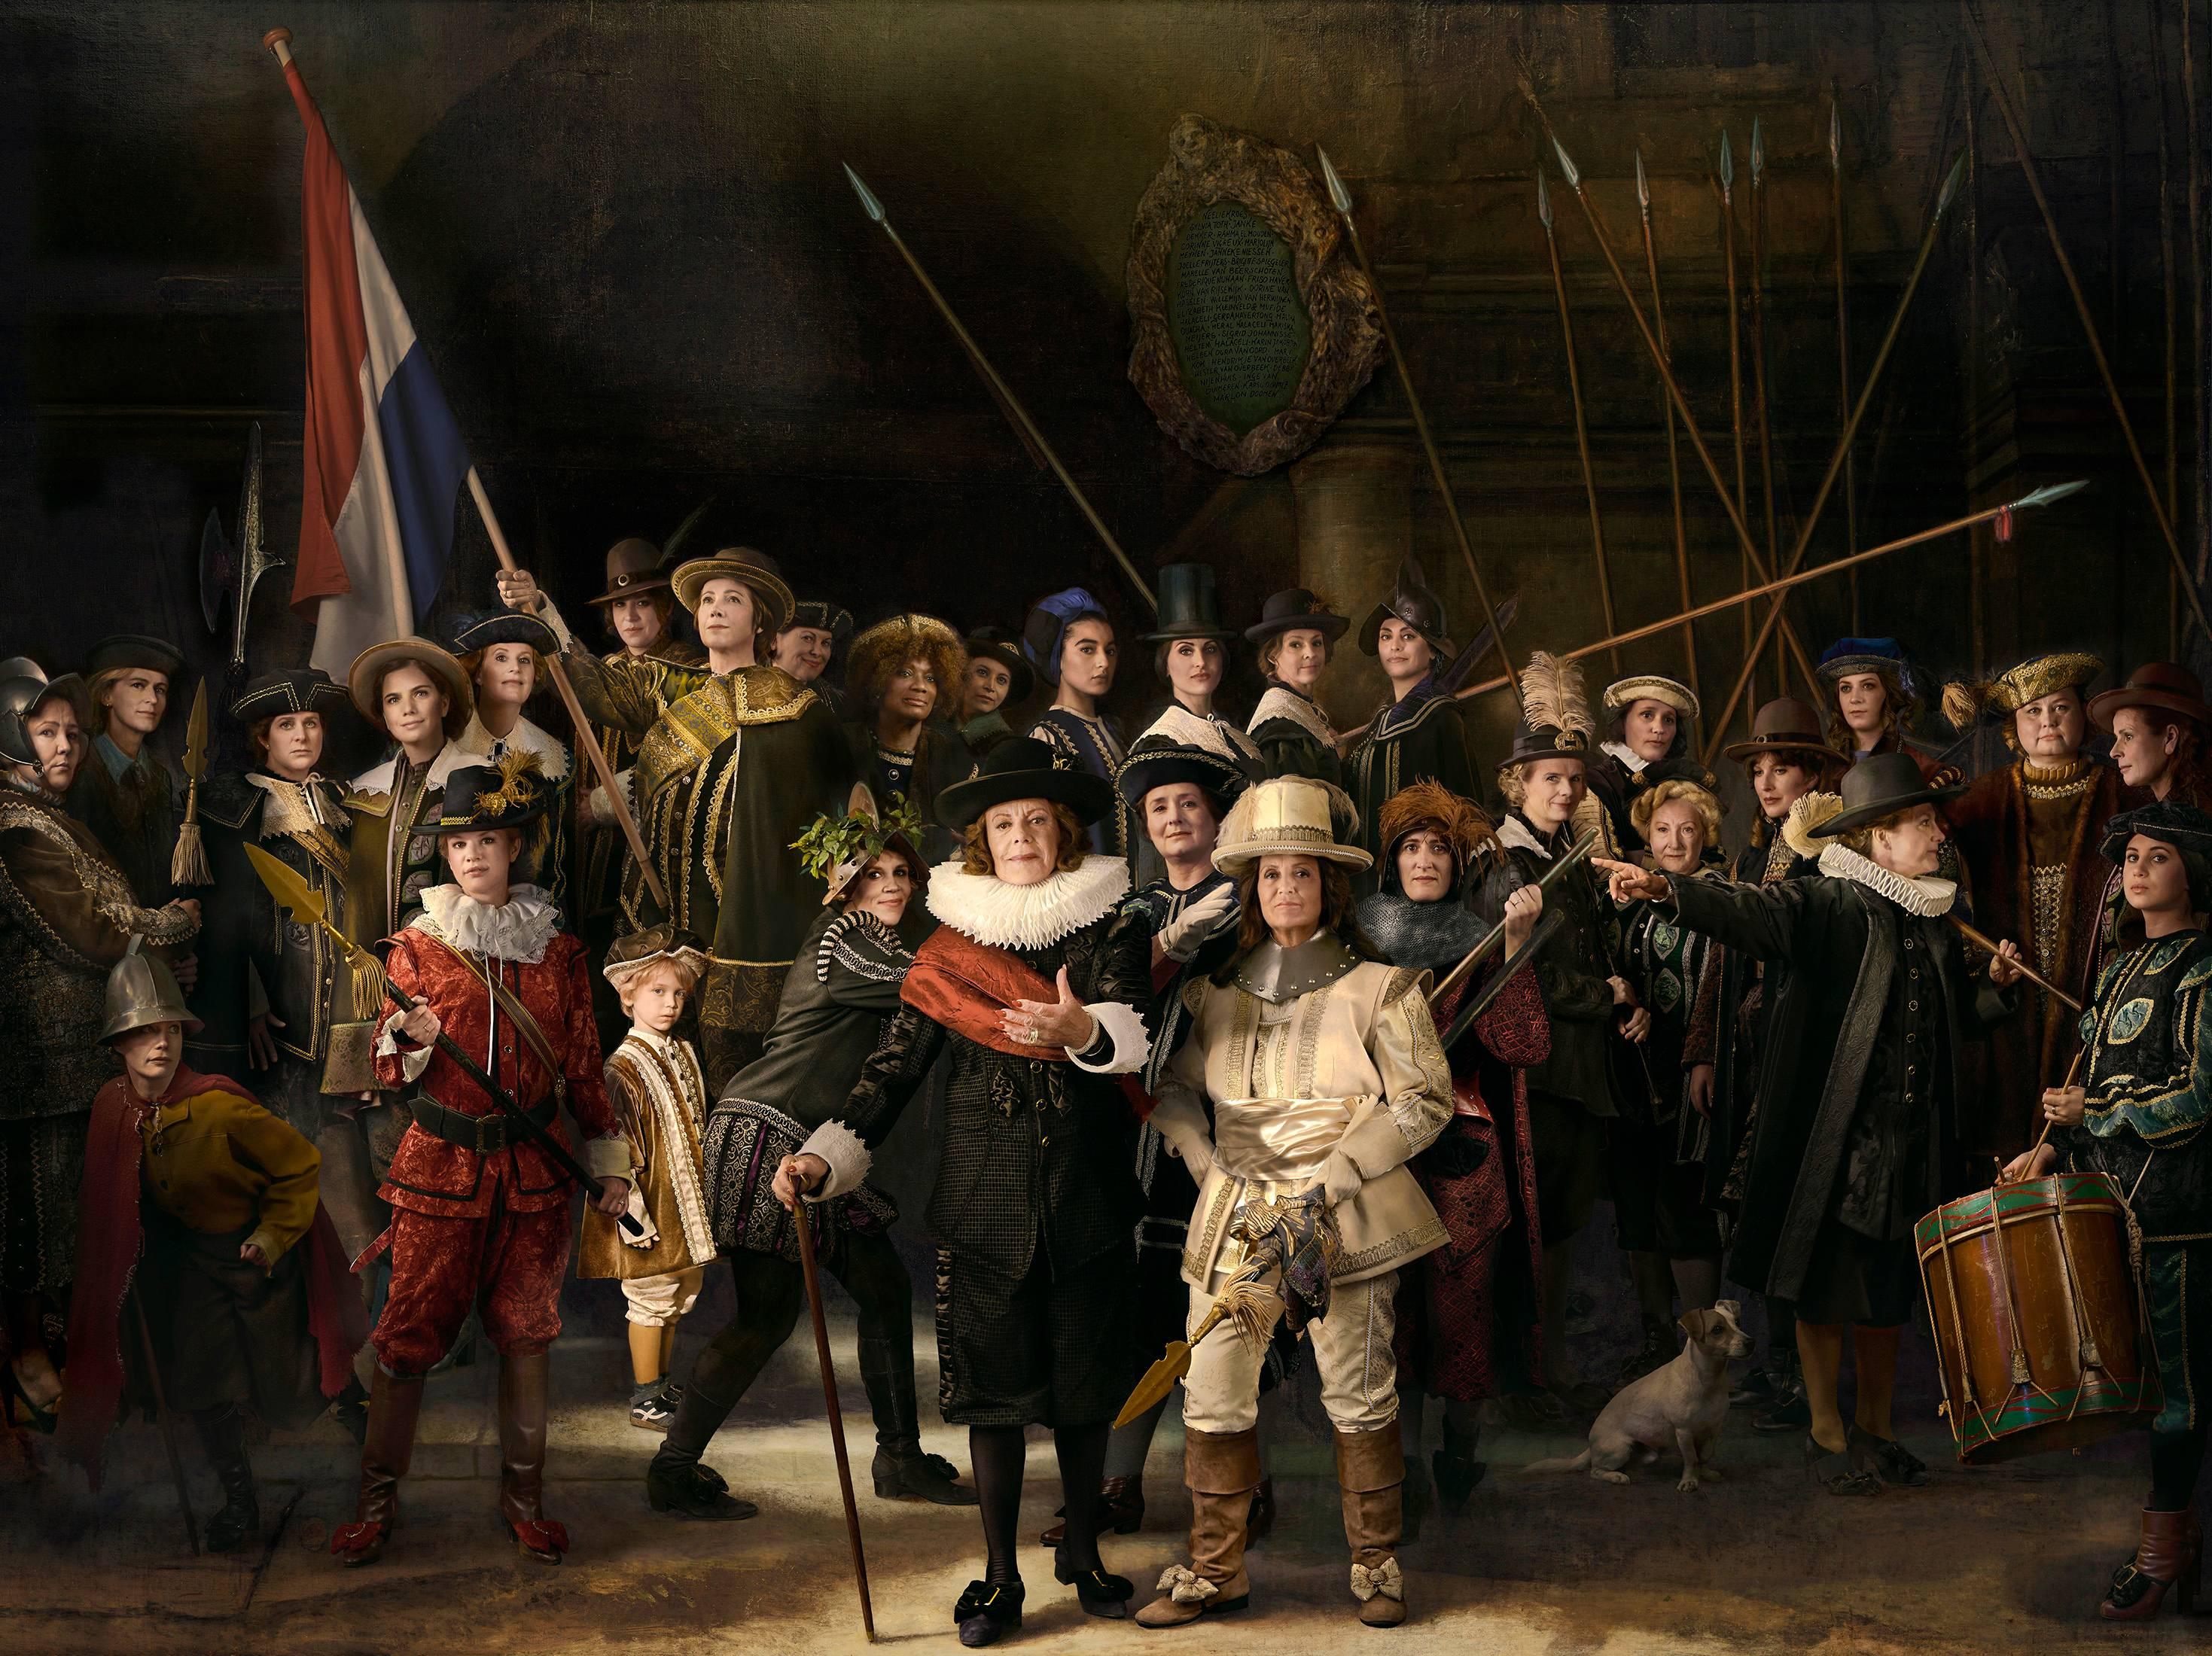 E2 - Kleinveld & Julien Figurative Print - Ode to Rembrandt's The Night Watch